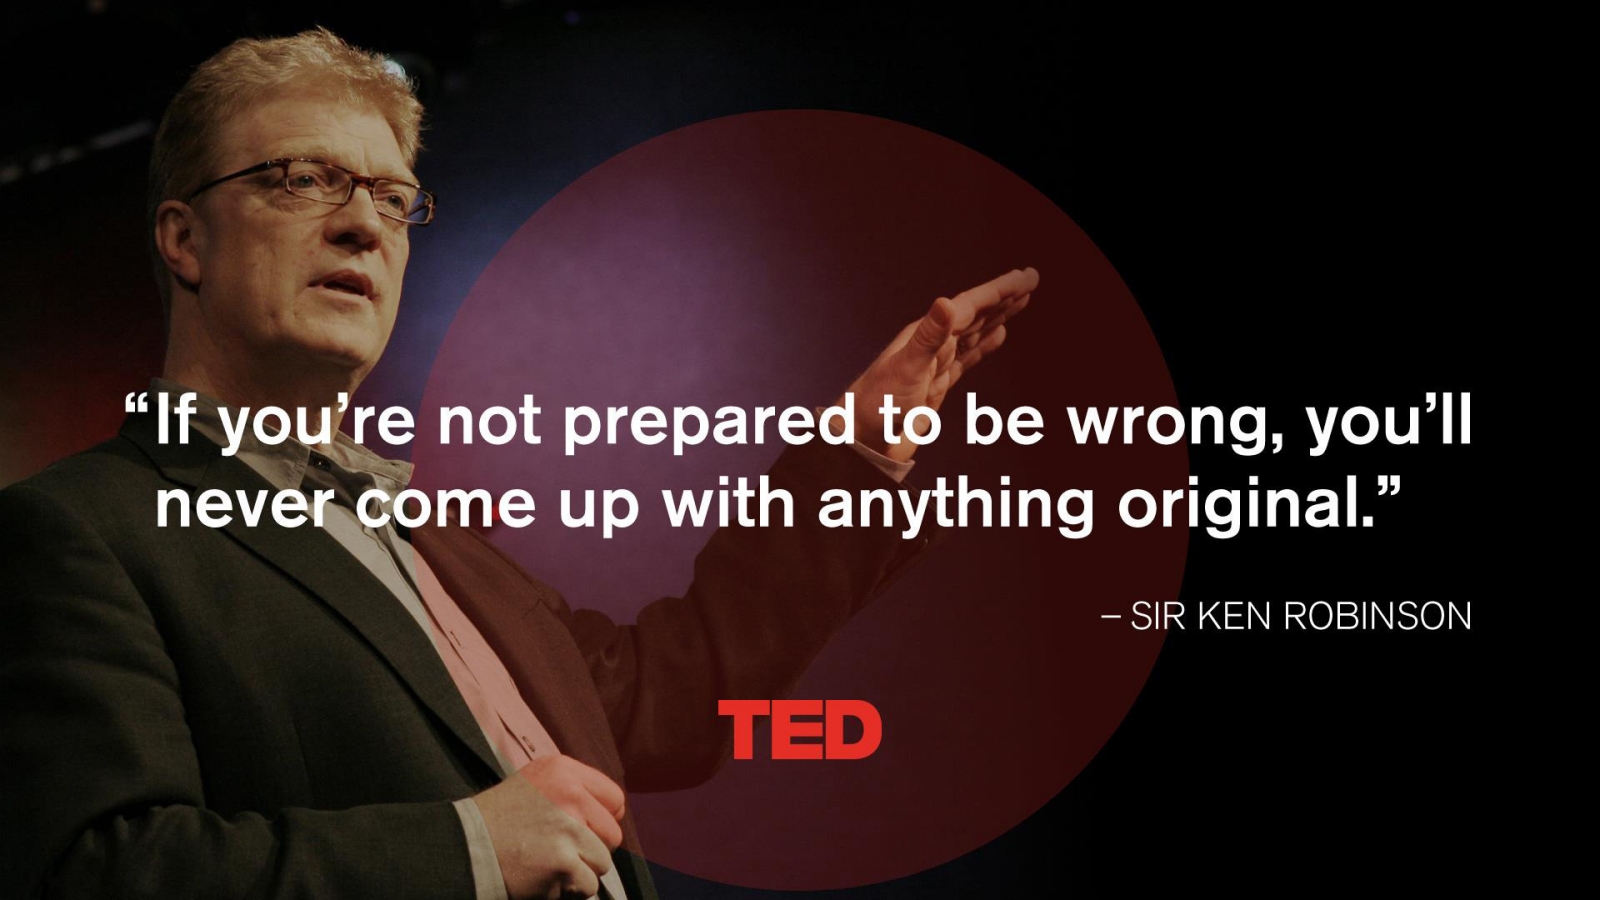 Sir Ken Robinson Quote for 1600 x 900 HDTV resolution